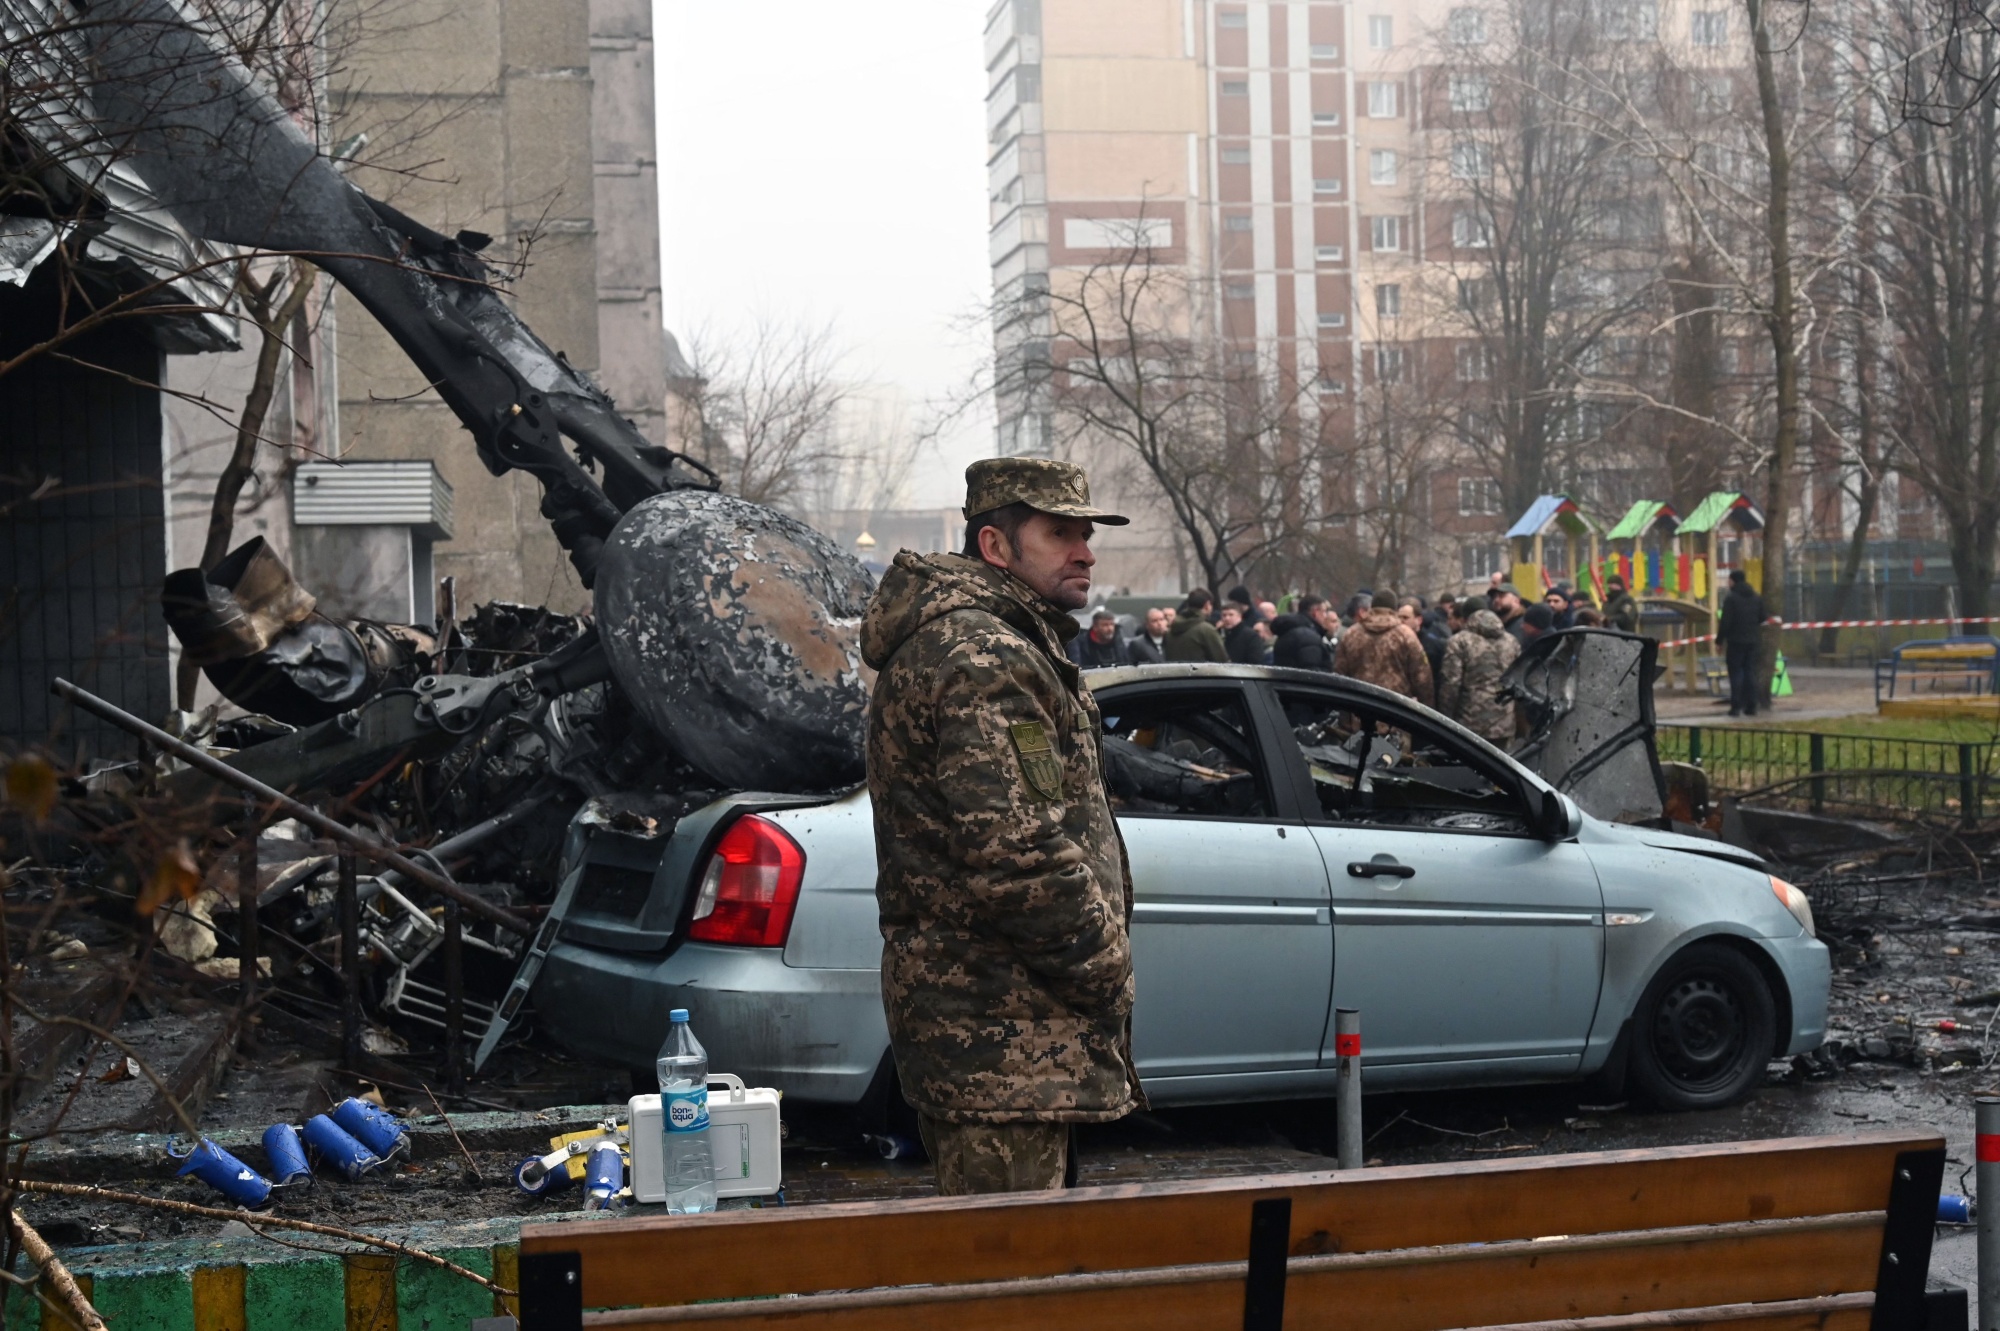 Security personnel attend the scene of a helicopter crash in Brovary, near Kyiv on Jan. 18.